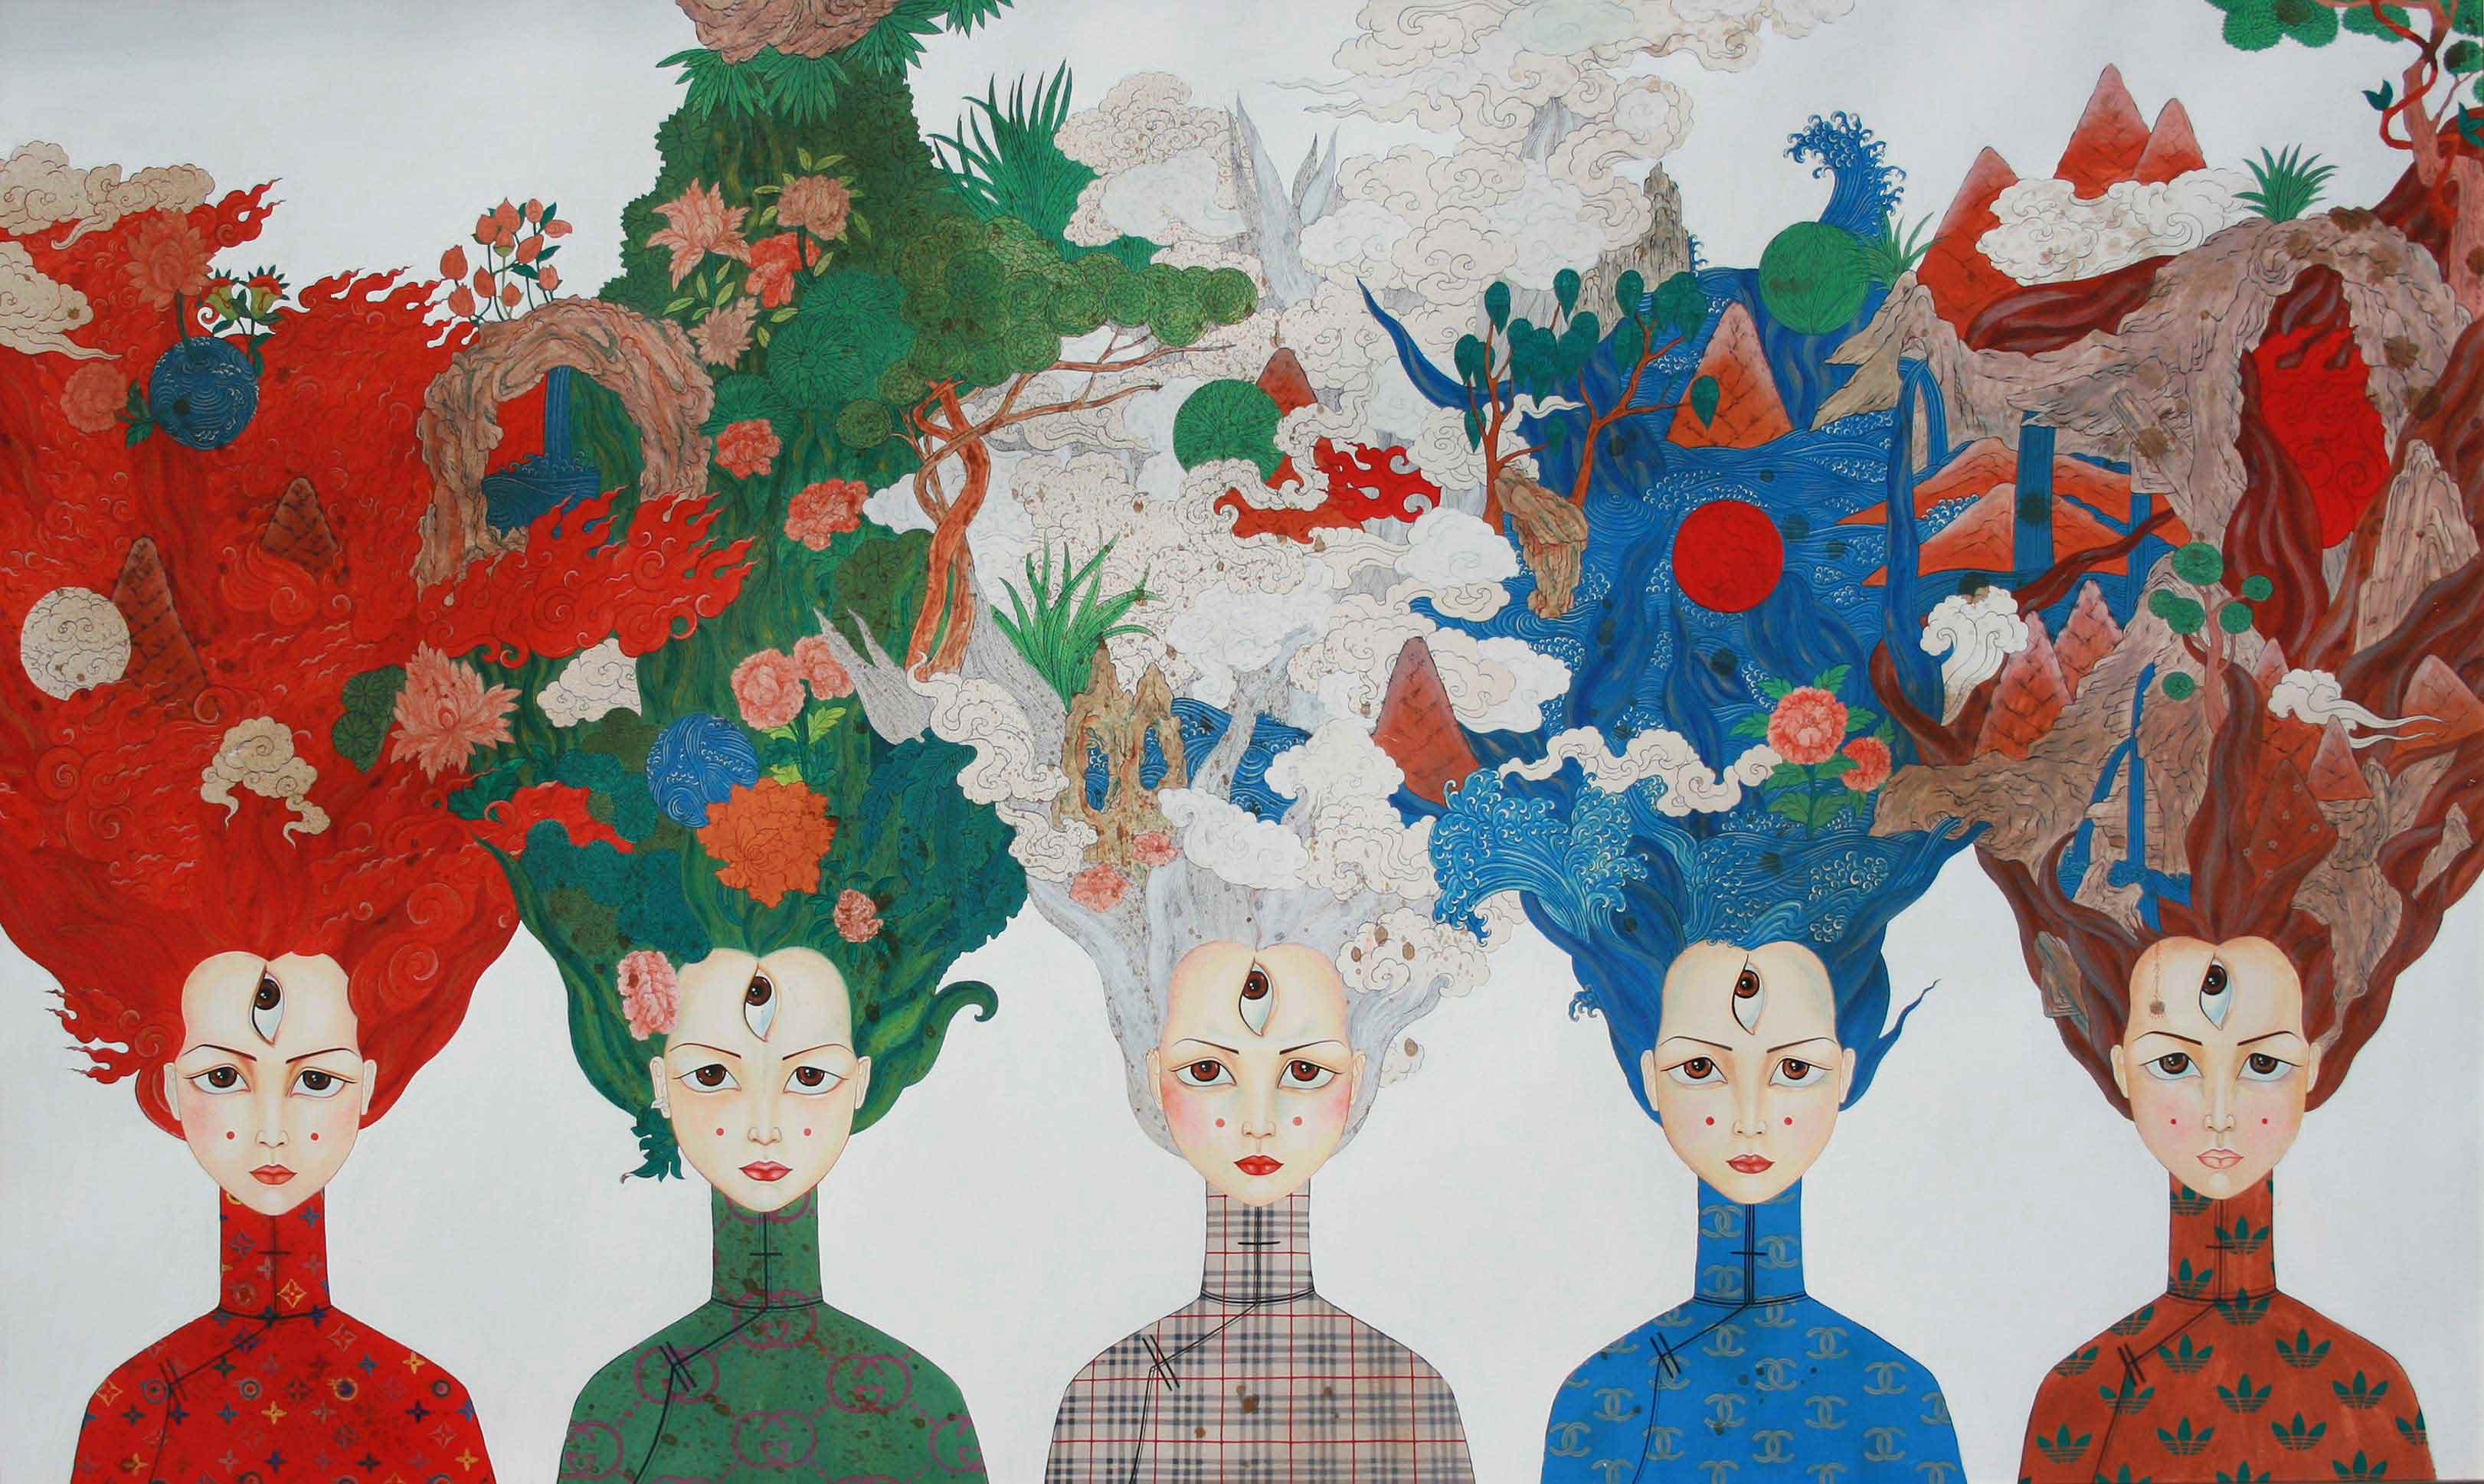 "From us" 2013 -  gouache, acrylic, cotton (85x137 cm) | Painting by Nomin Bold | Photo courtesy of Nomin Bold